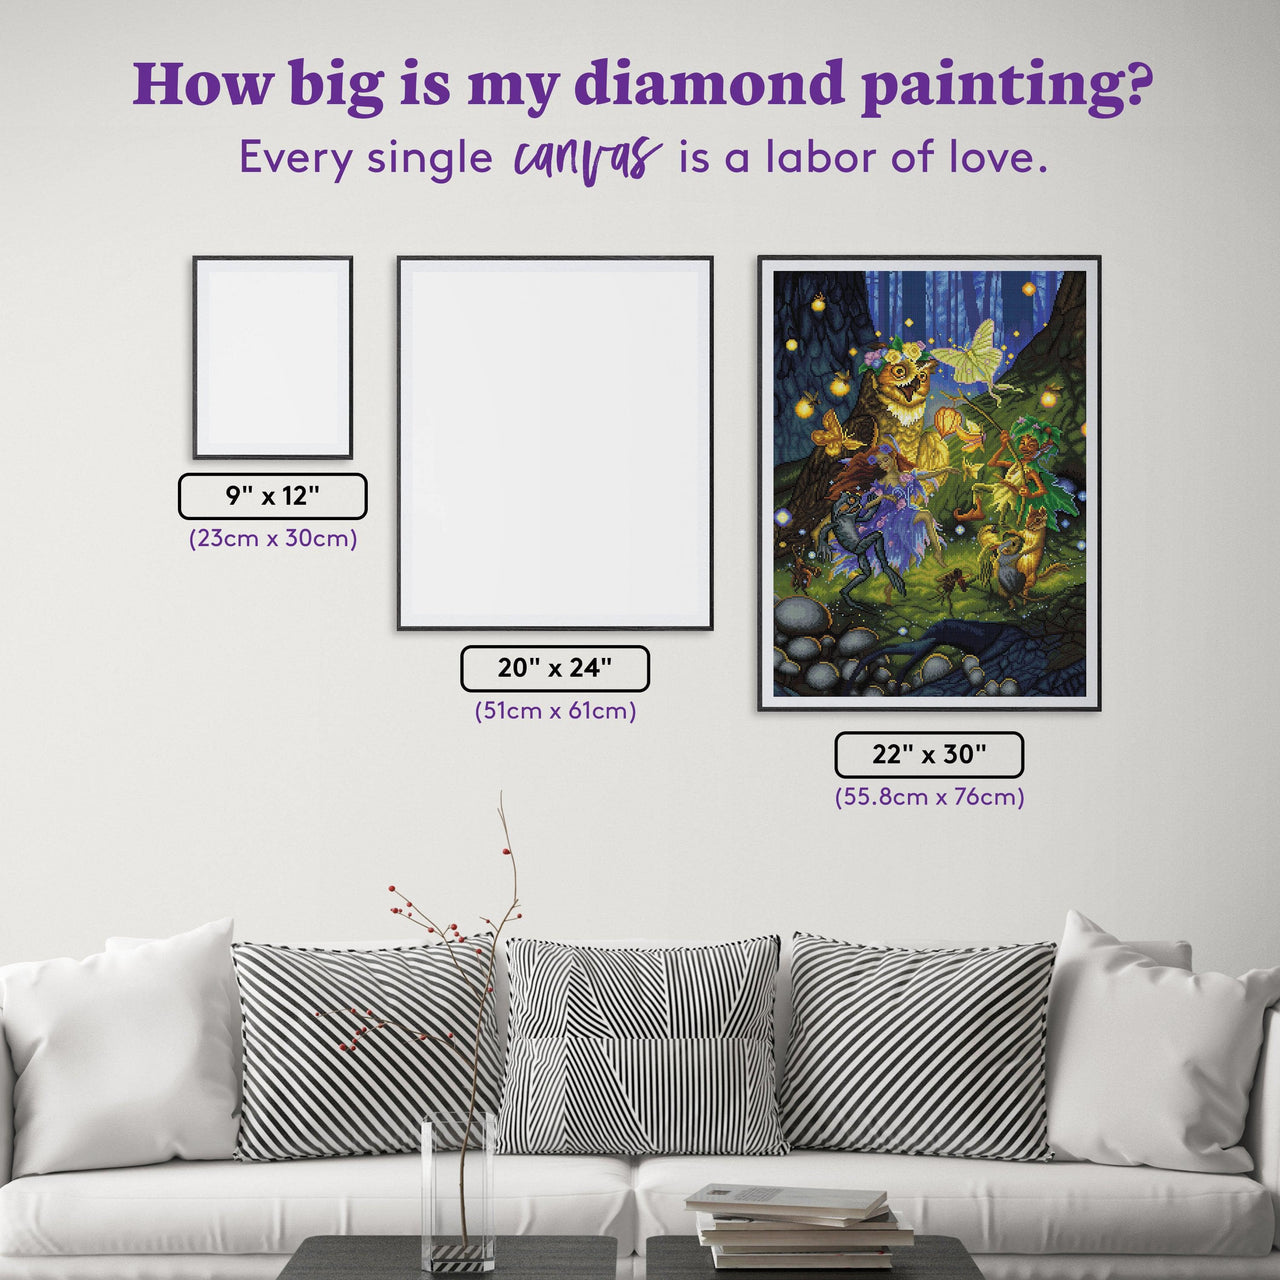 Diamond Painting Midsummers Eve 22" x 30" (55.8cm x 76cm) / Square with 62 Colors including 4 ABs / 68,320